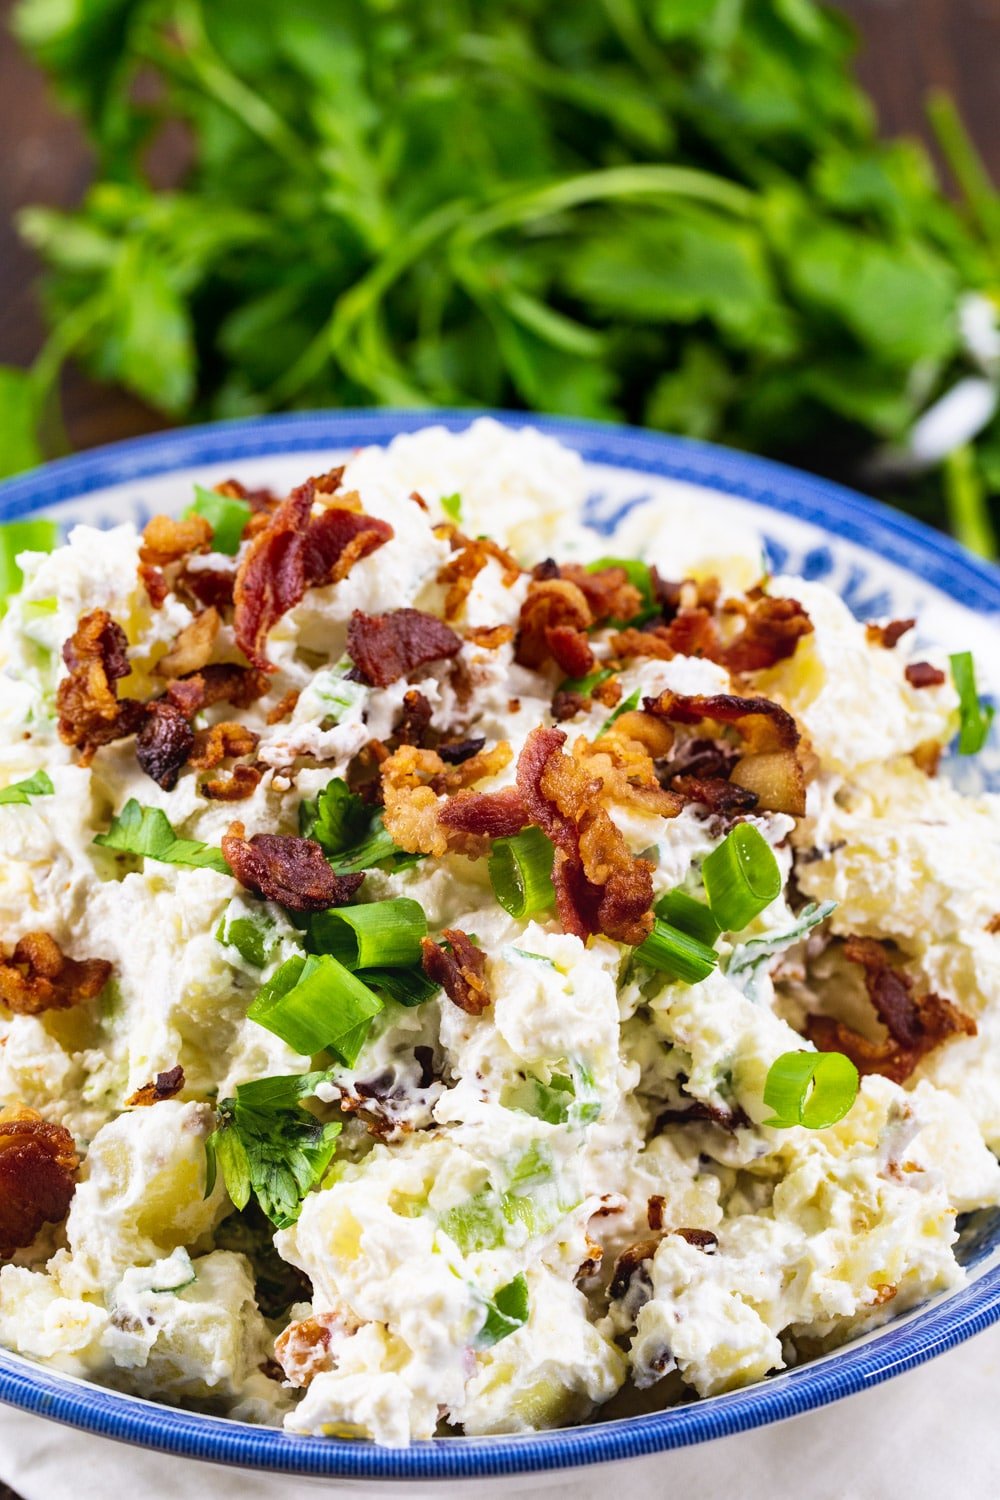 Potato Salad topped with crumbled bacon and green onions.